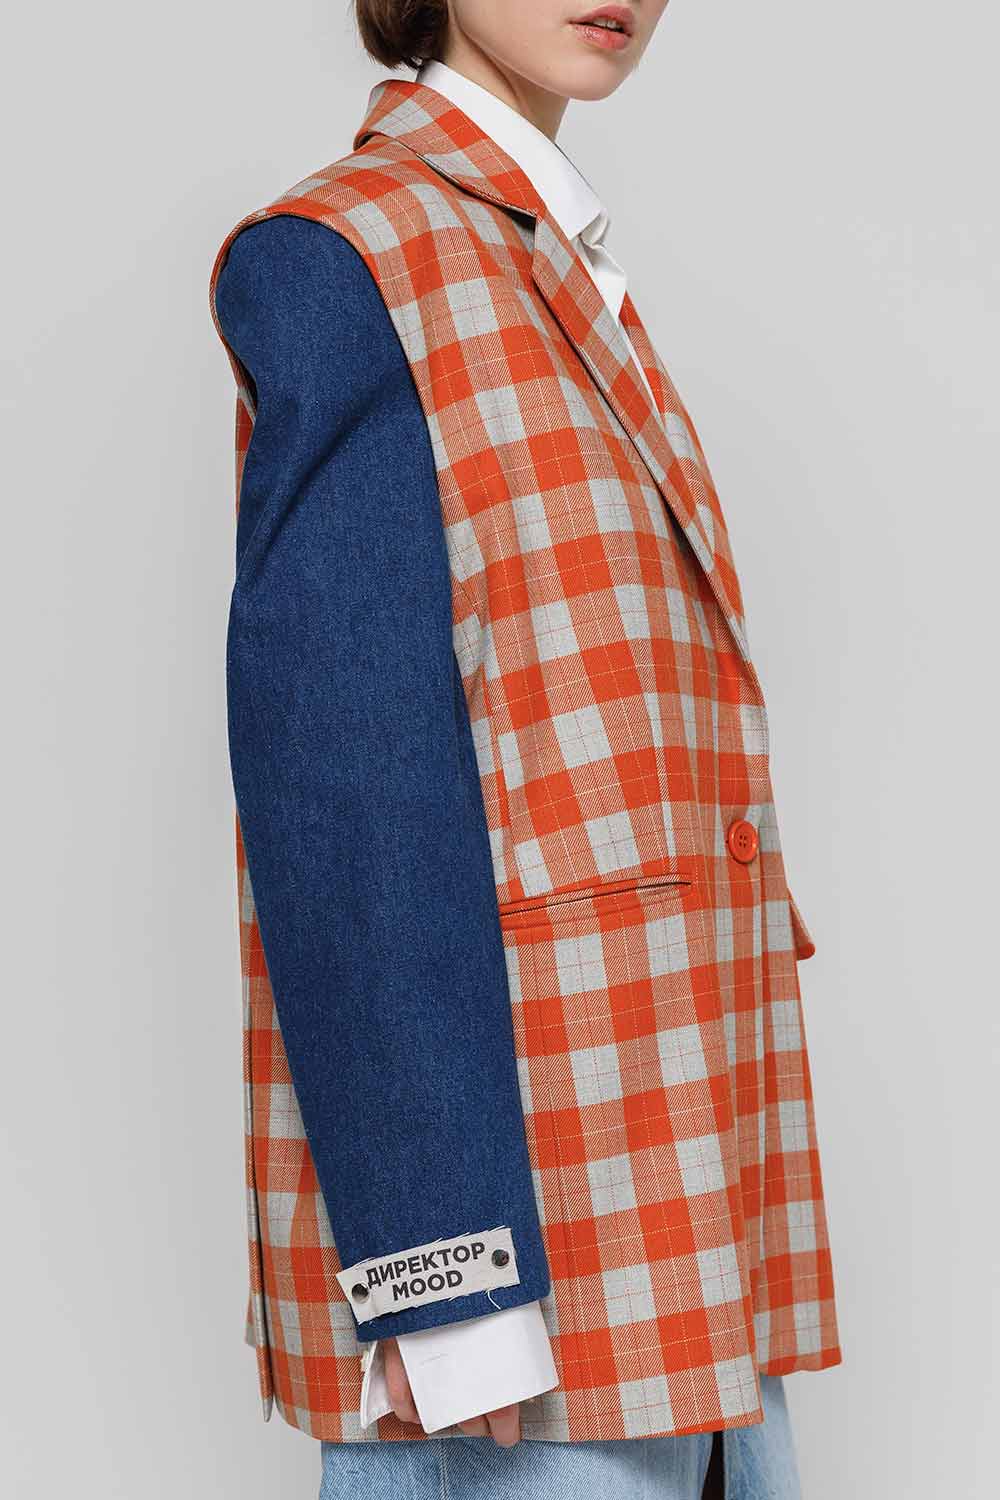 Crepe jacket-constructor with orange-blue checked body, denim sleeves side view. Blazer